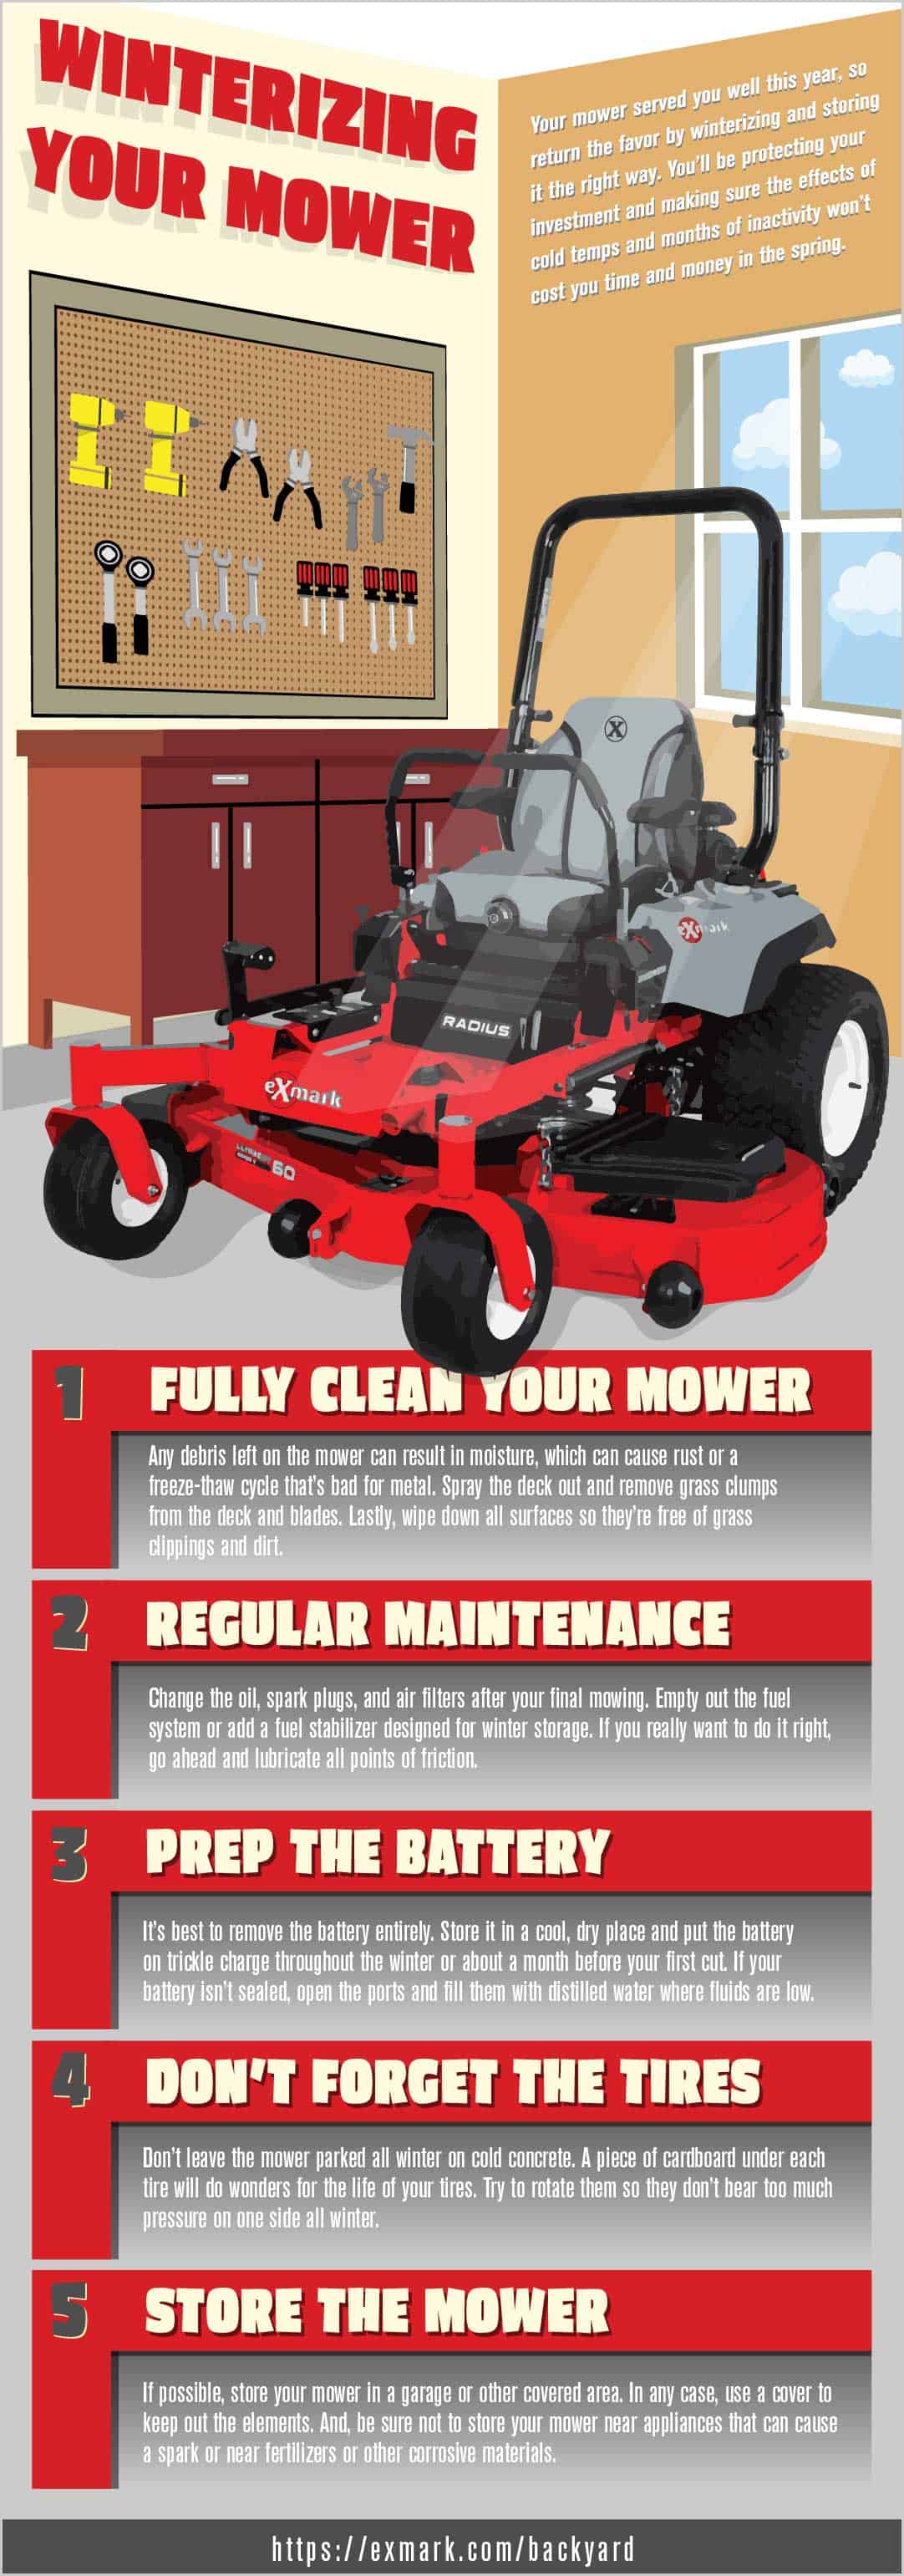 How to winterize a lawn mower infographic - mower winterization guide